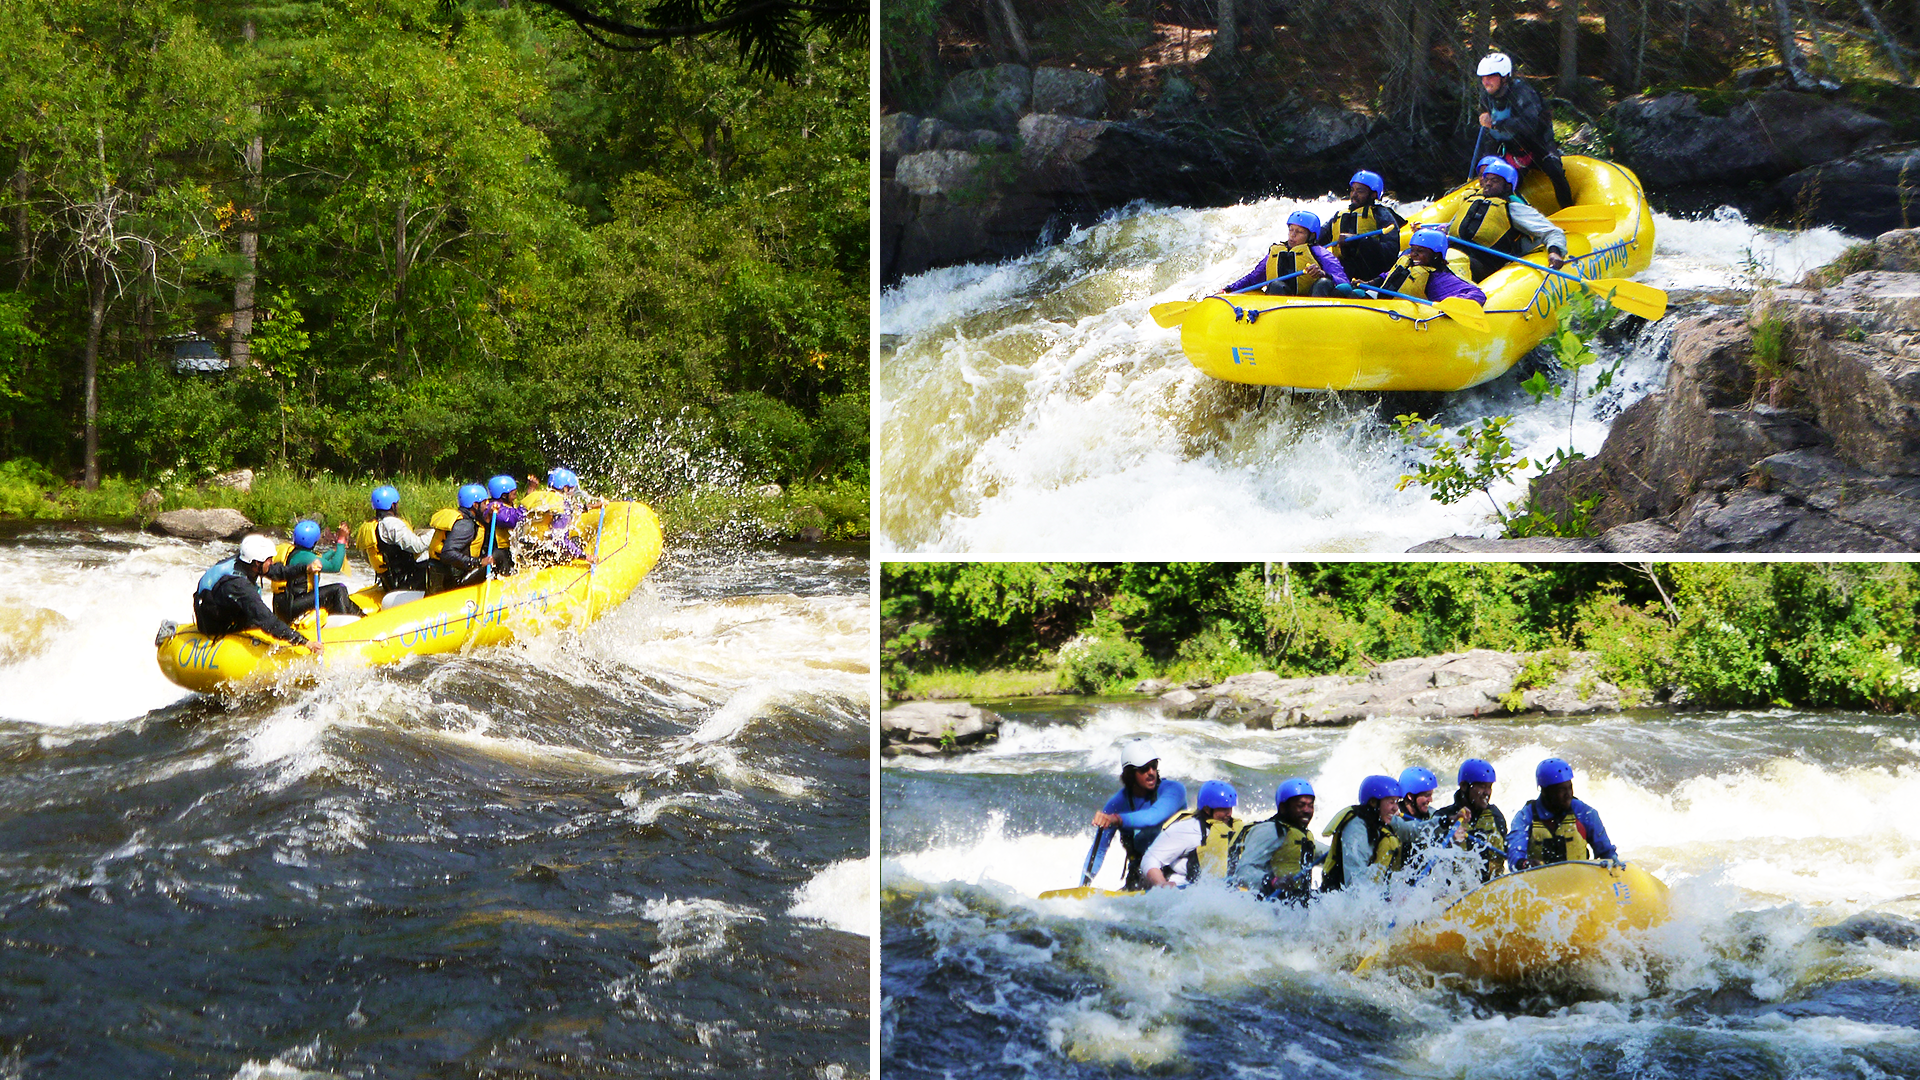 Ottawa's RealDecoy team went whitewater rafting last summer as a fun team building exercise!